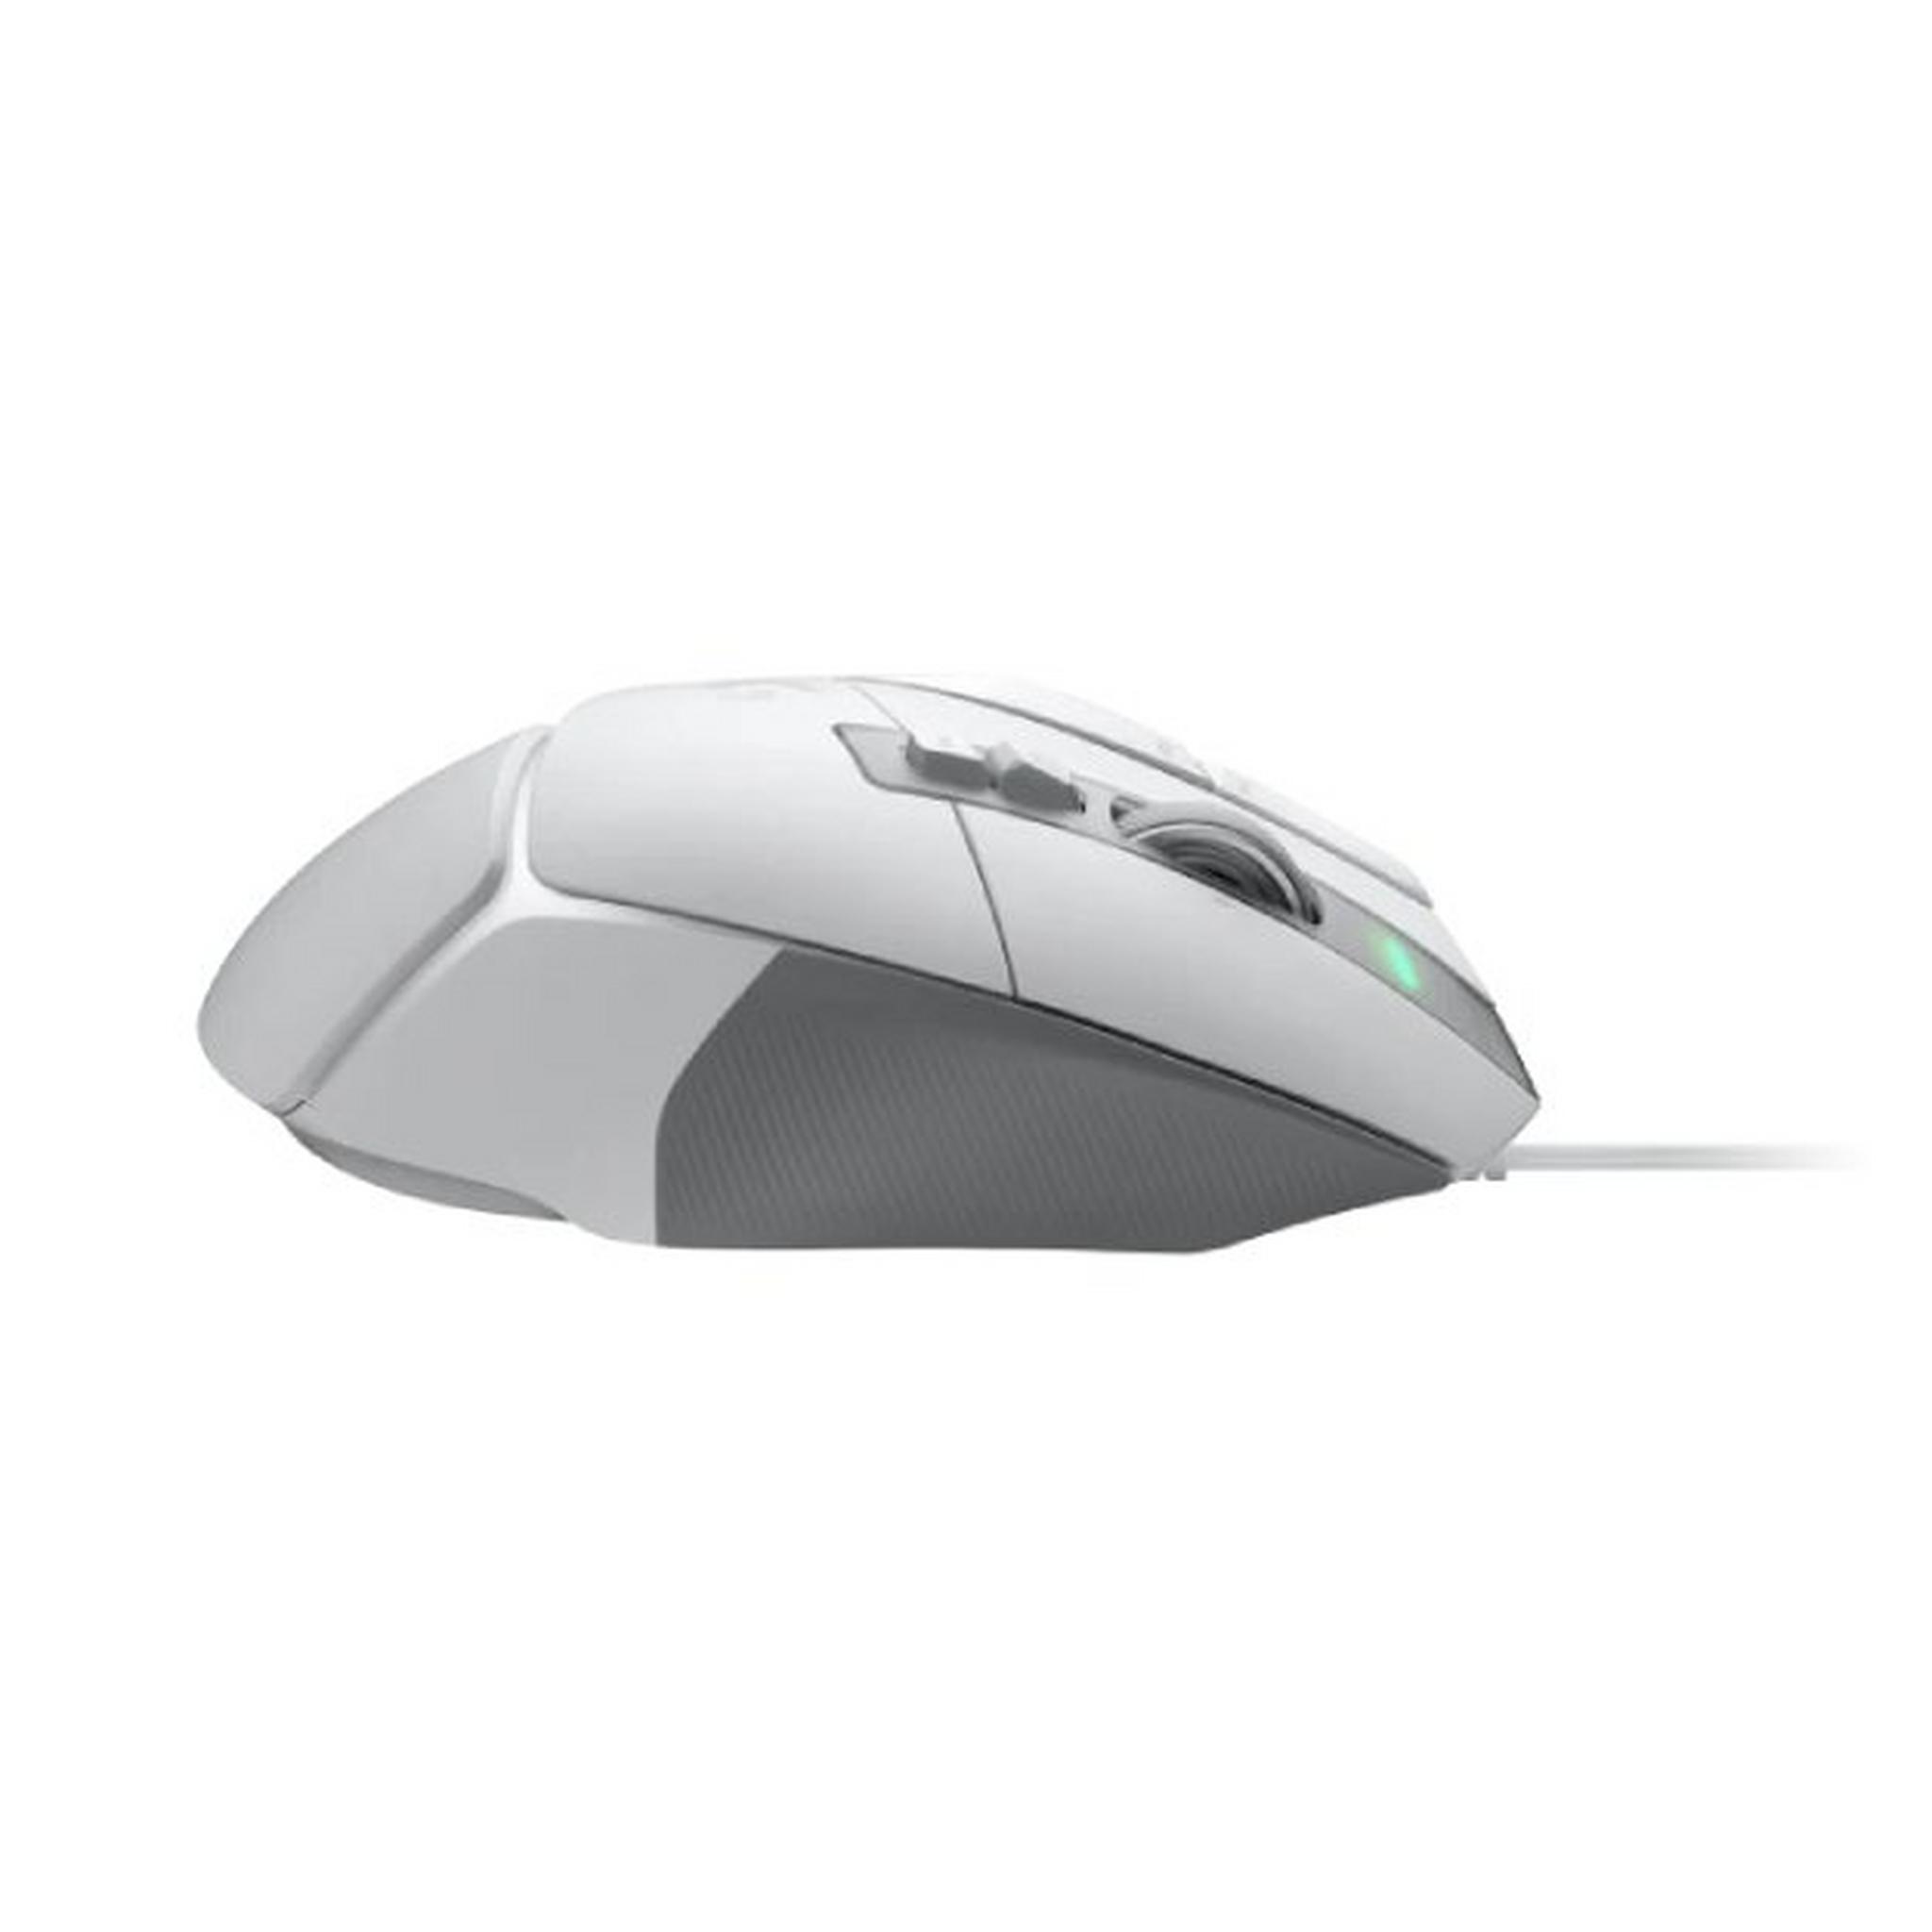 Logitech Gaming Mouse, Optical, Wired, G502X – White